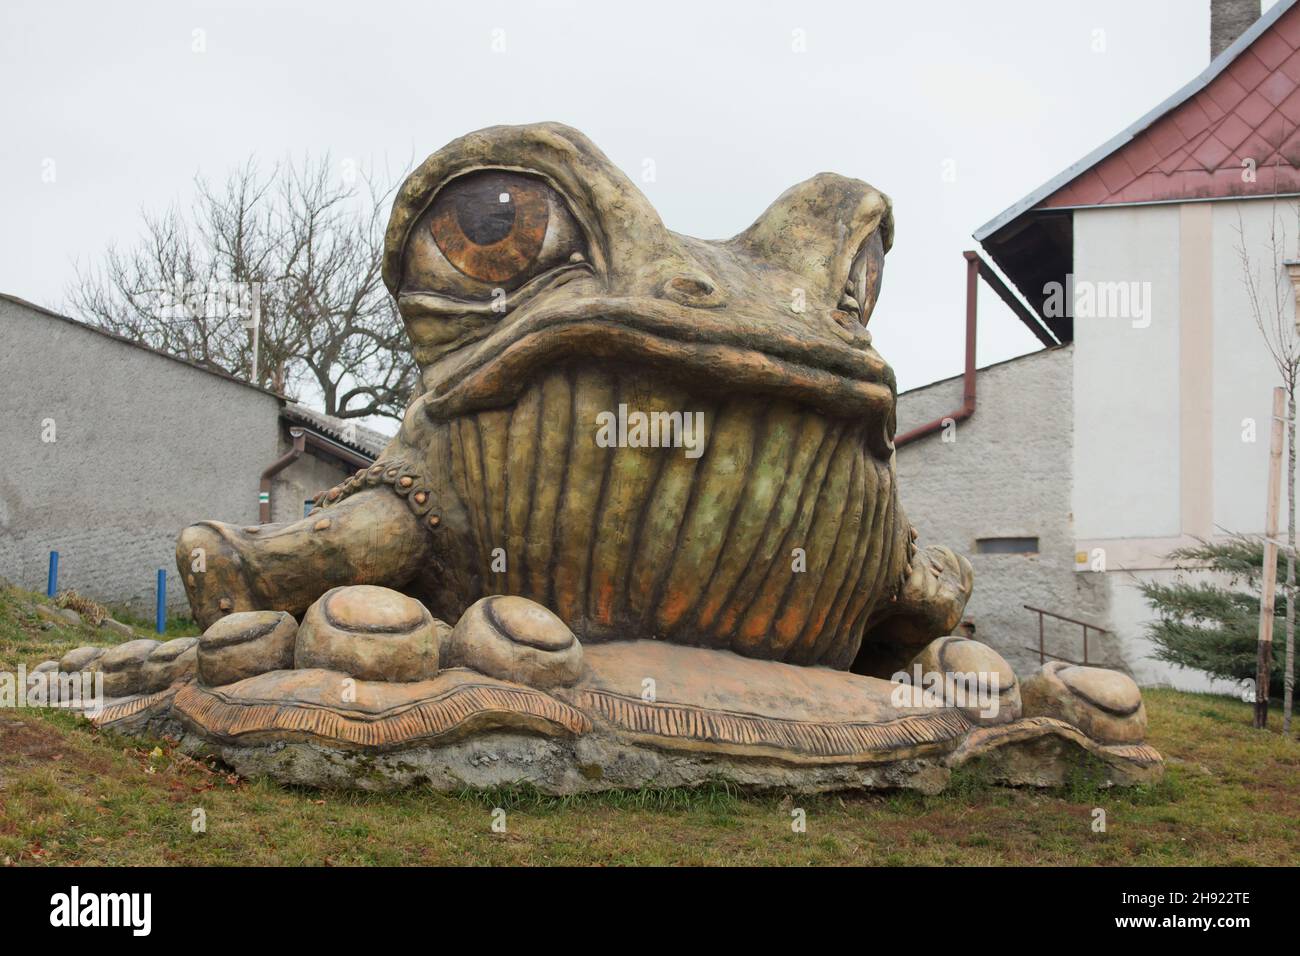 Huge statue of a toad designed by Czech sculptor Michal Olšiak (2009) in Tršice near Olomouc in North Moravia, Czech Republic. A toad is also depicted in the coat of arms of the village of Tršice. Stock Photo